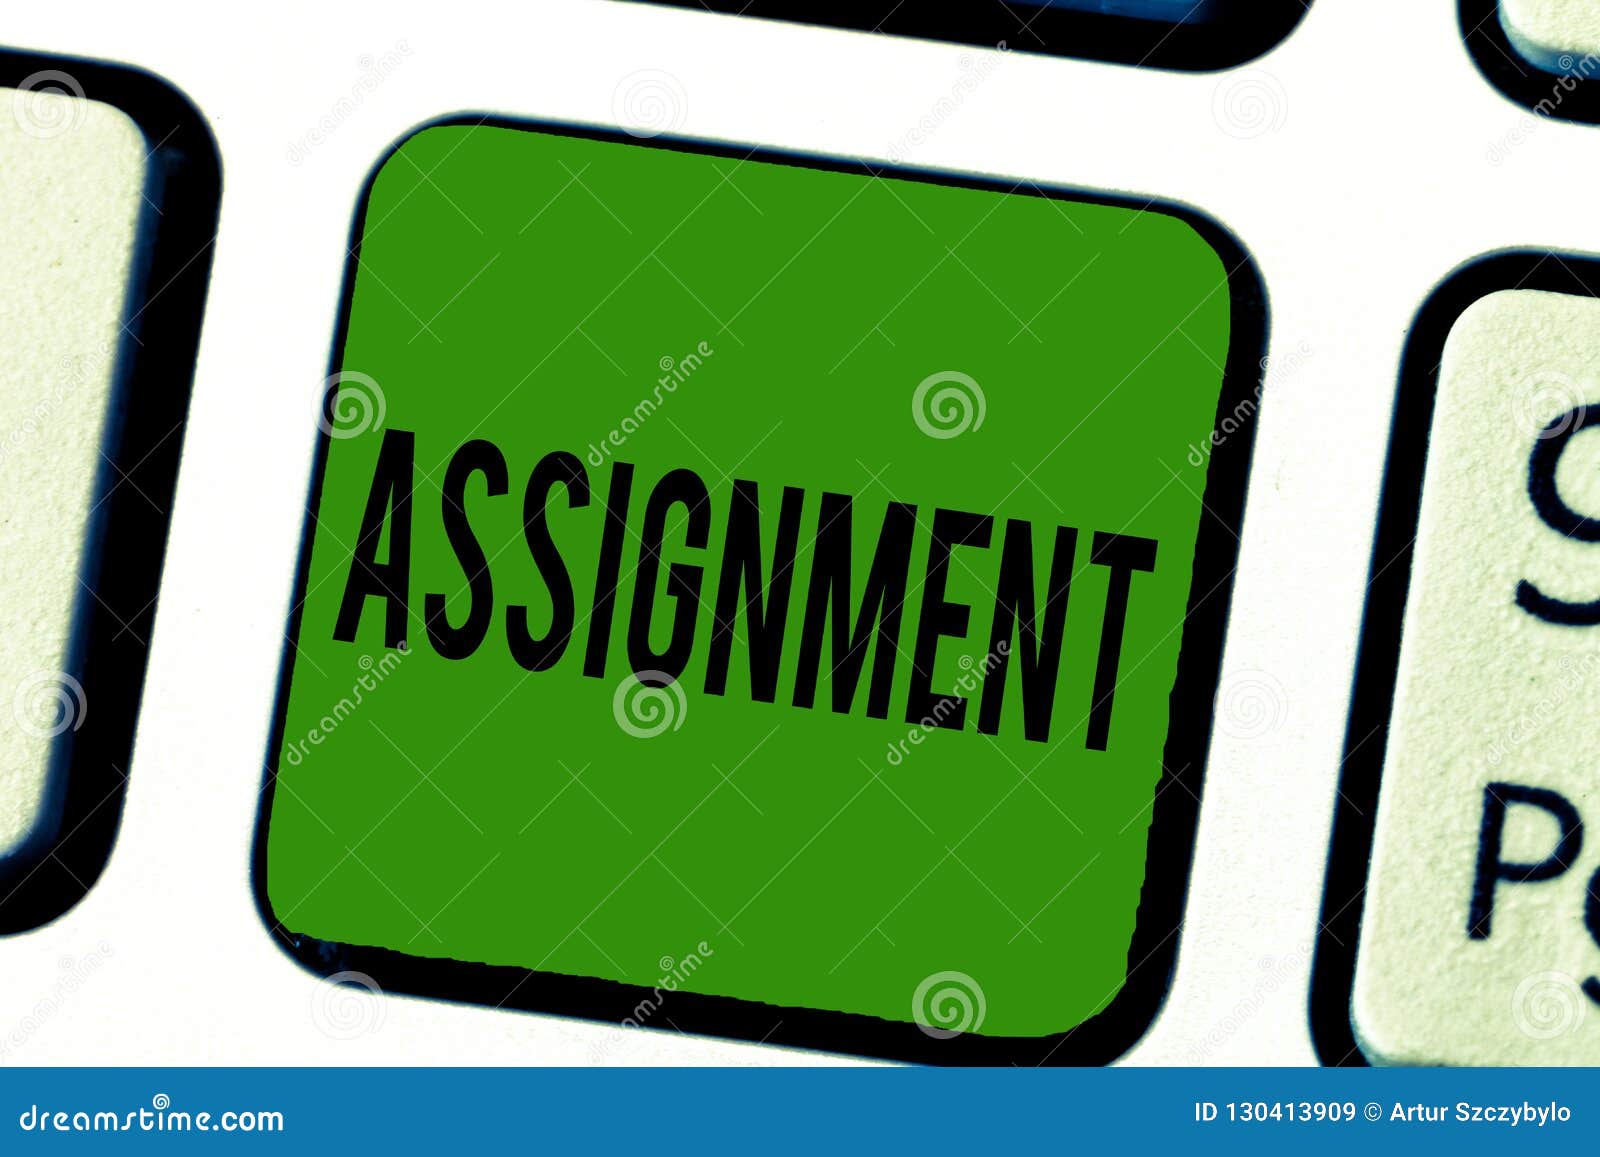 what is the meaning of task assignment